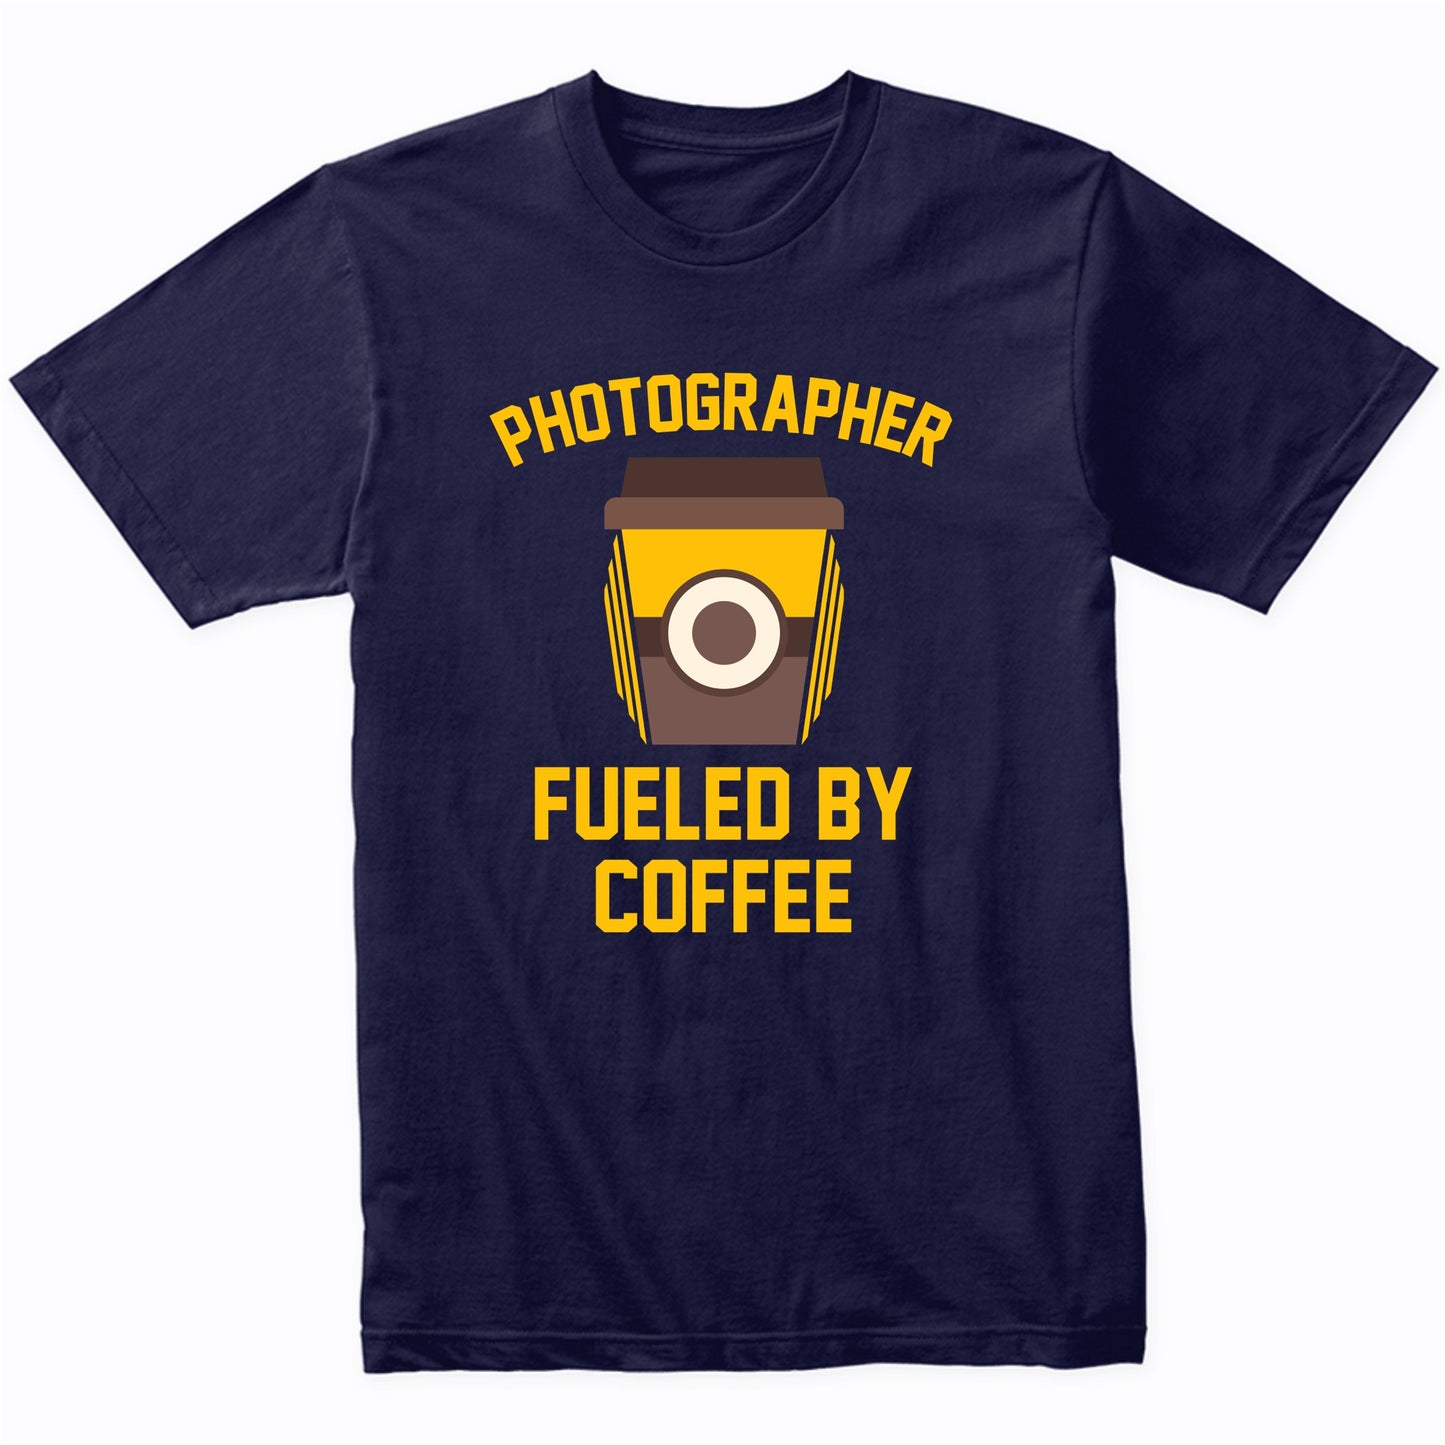 Photographer Fueled By Coffee Funny Photography Shirt